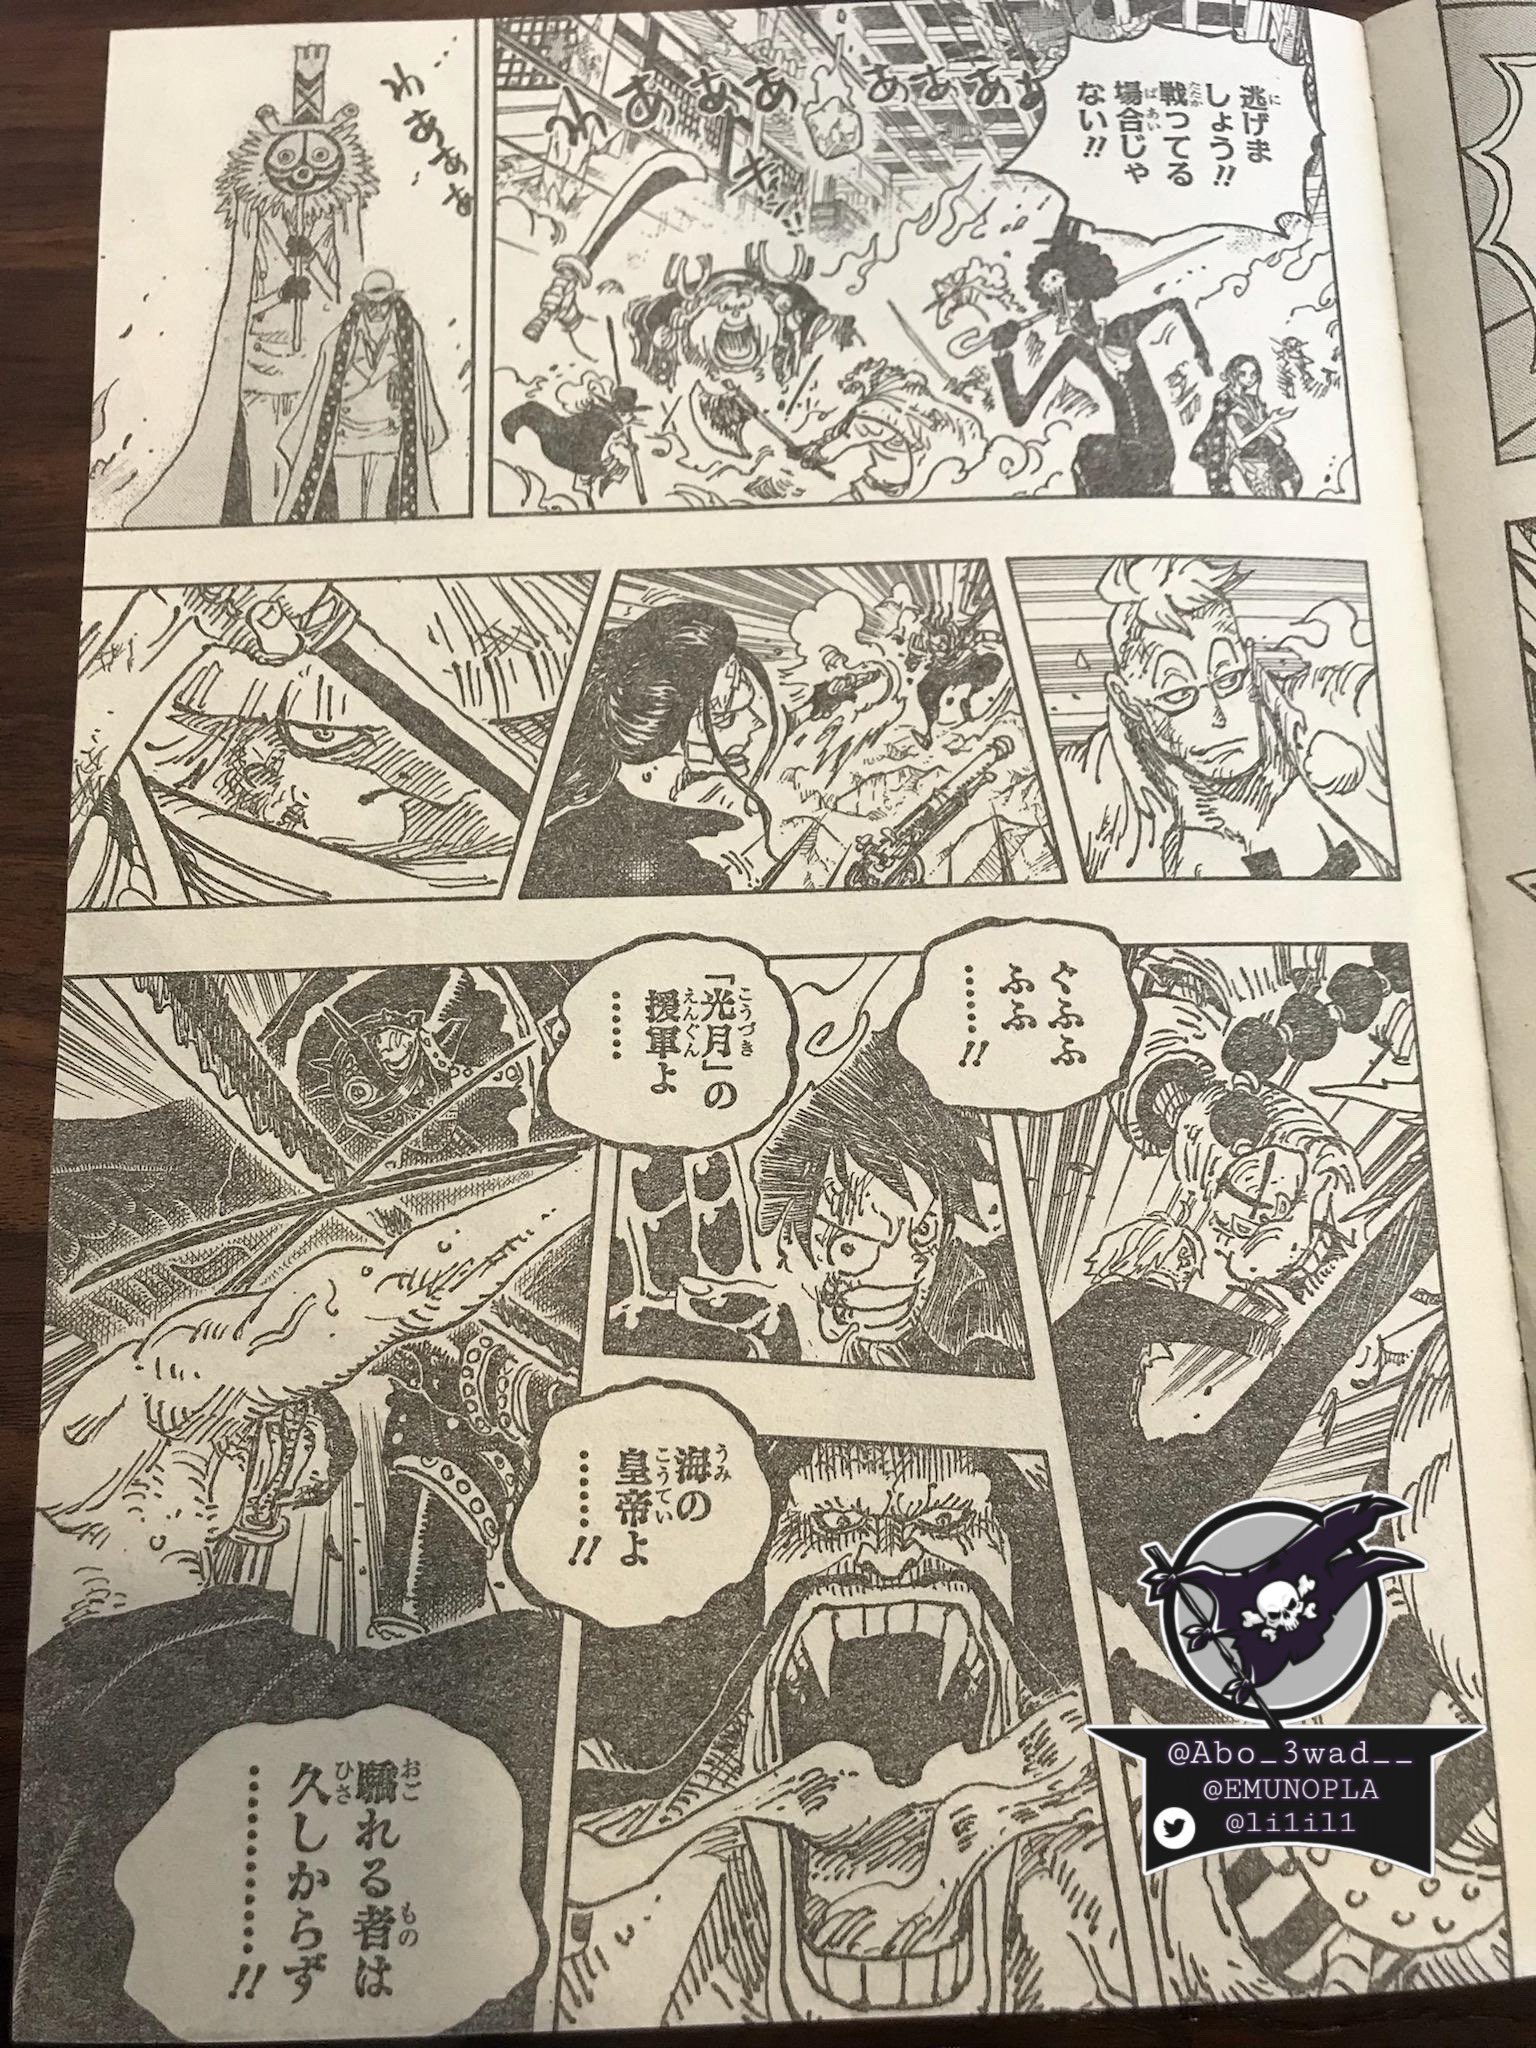 Spoiler One Piece Chapter 1030 Spoilers Discussion Page 321 Worstgen